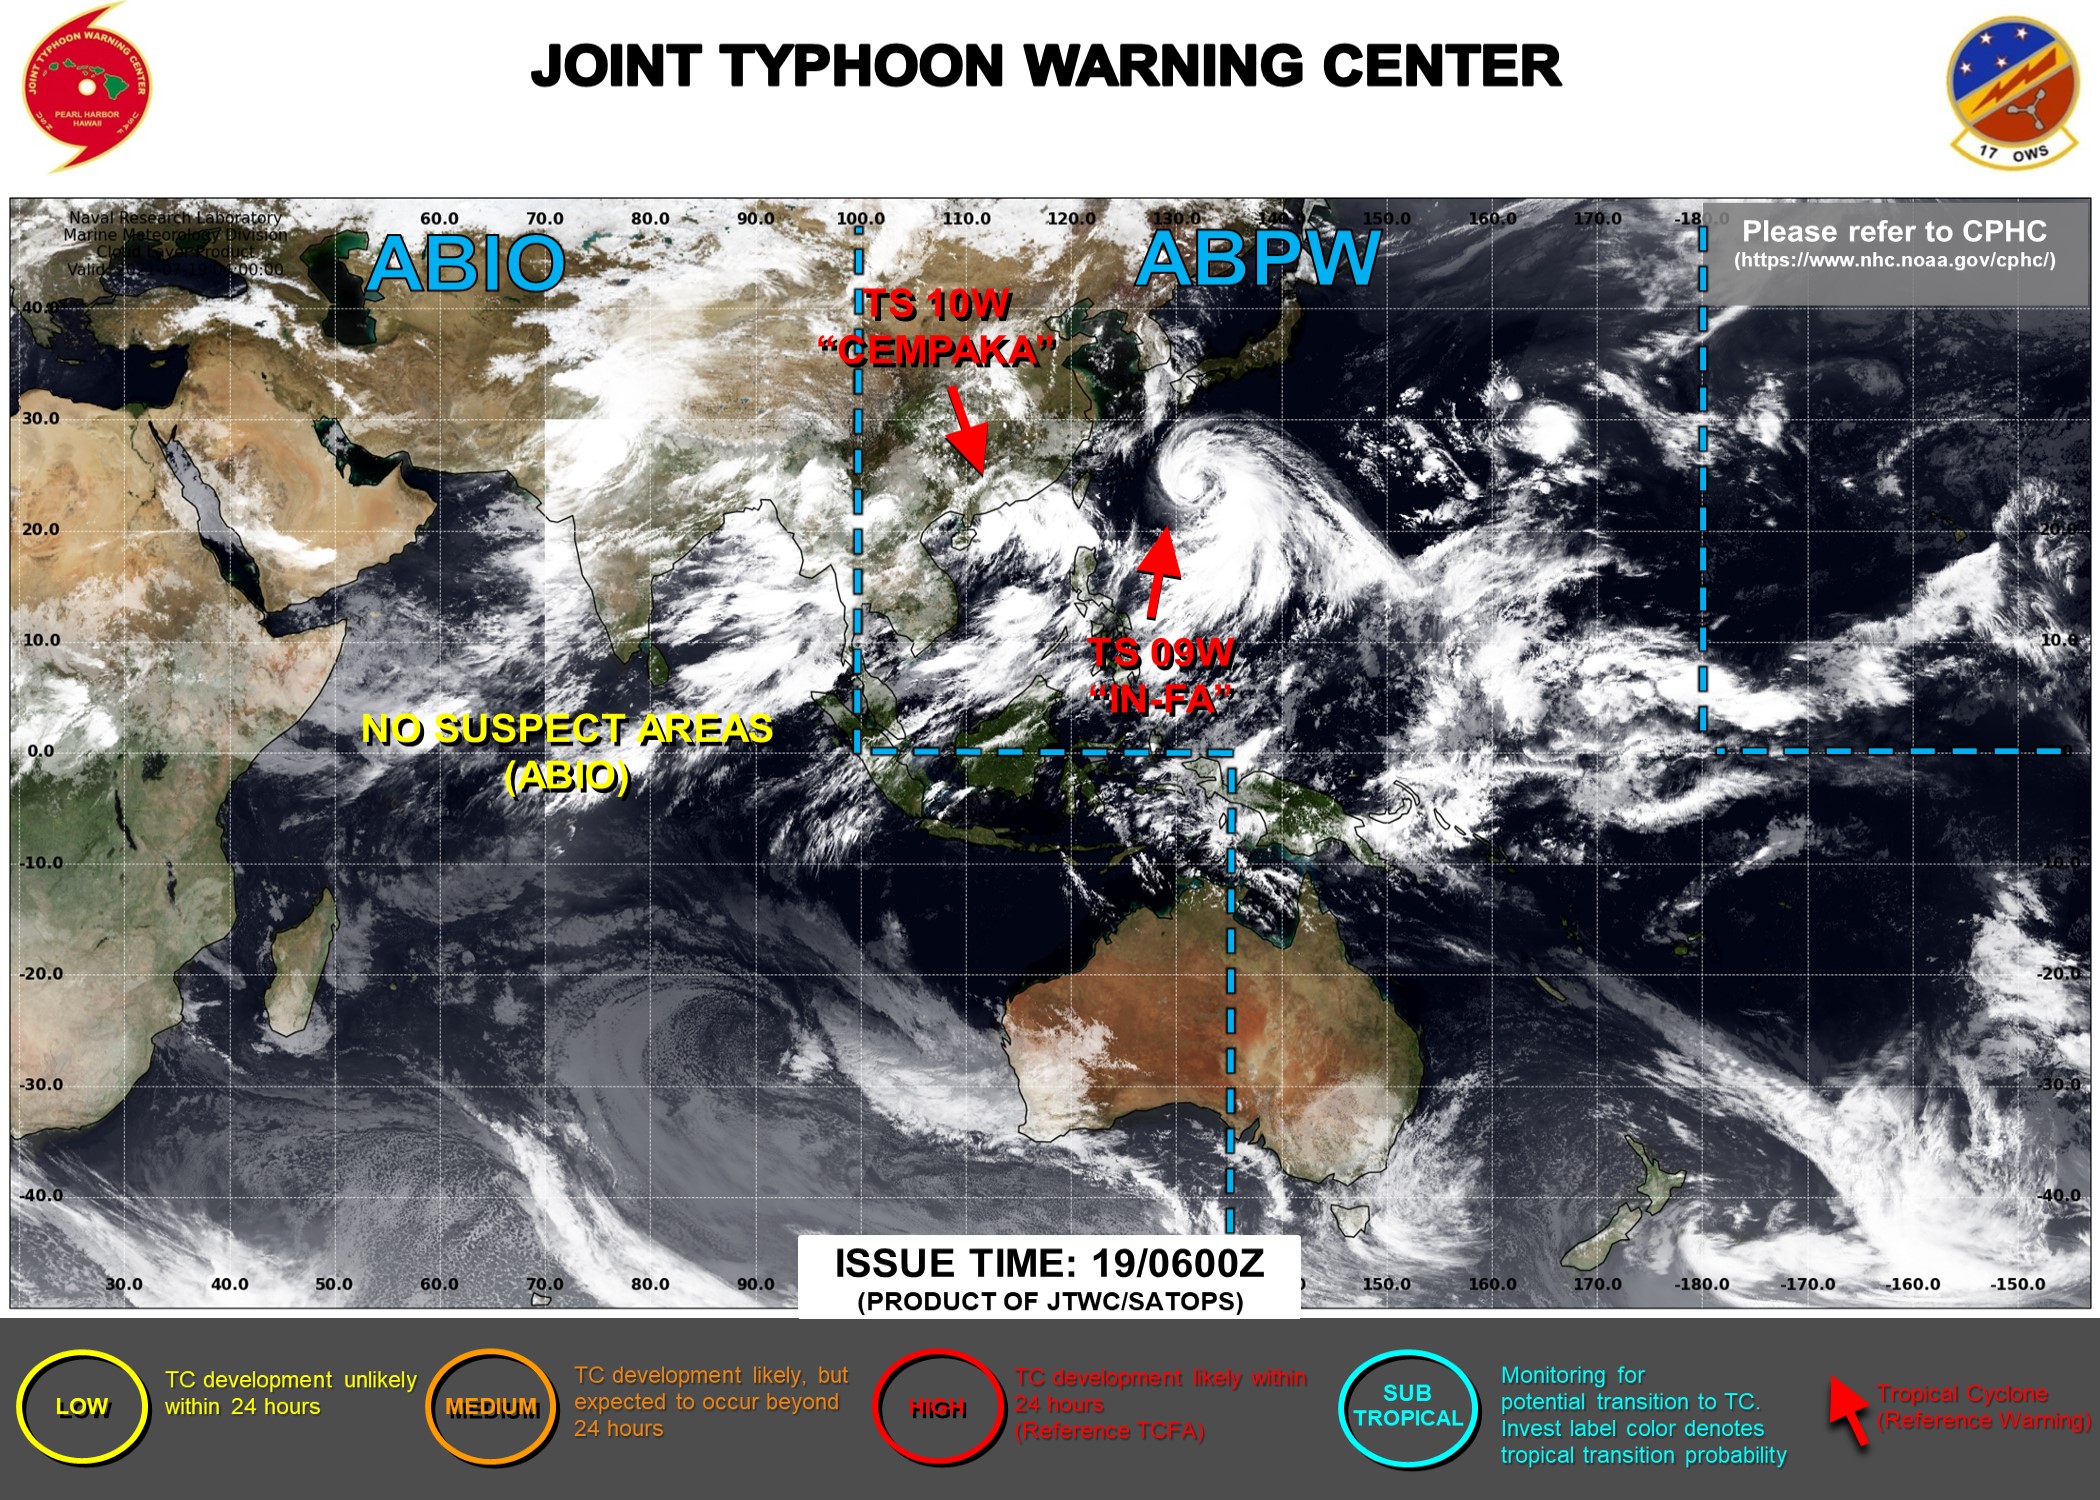 JTWC HAS BEEN ISSUING 6HOURLY WARNINGS ON 09W AND 10W. 3HOURLY SATELLITE BULLETINS ARE ISSUED FOR BOTH SYSTEMS.